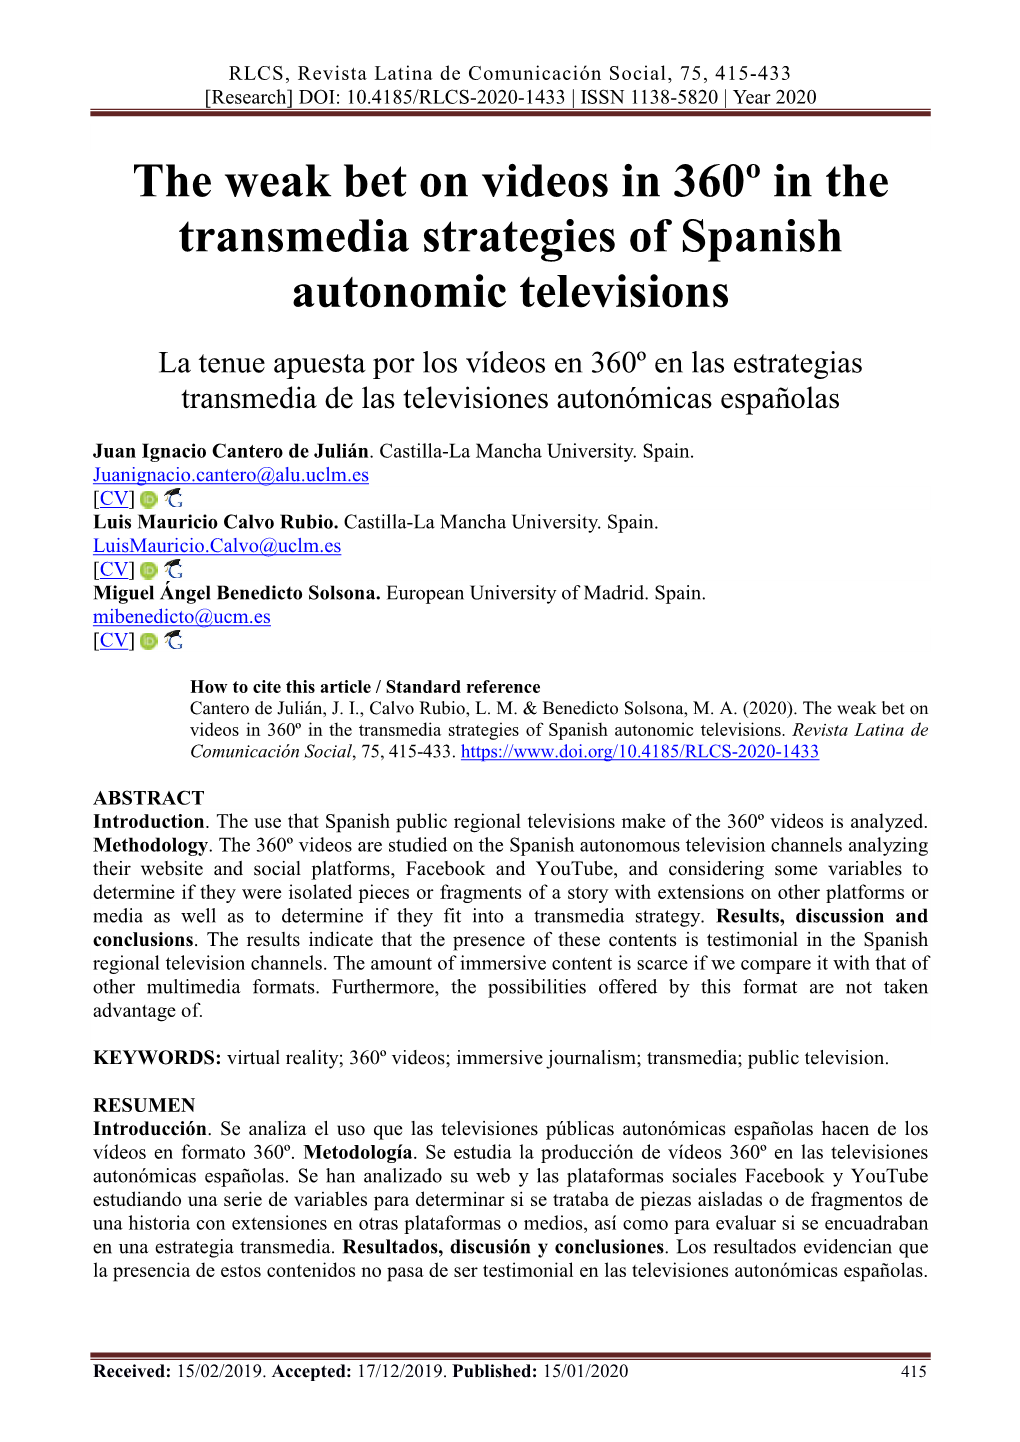 The Weak Bet on Videos in 360º in the Transmedia Strategies of Spanish Autonomic Televisions